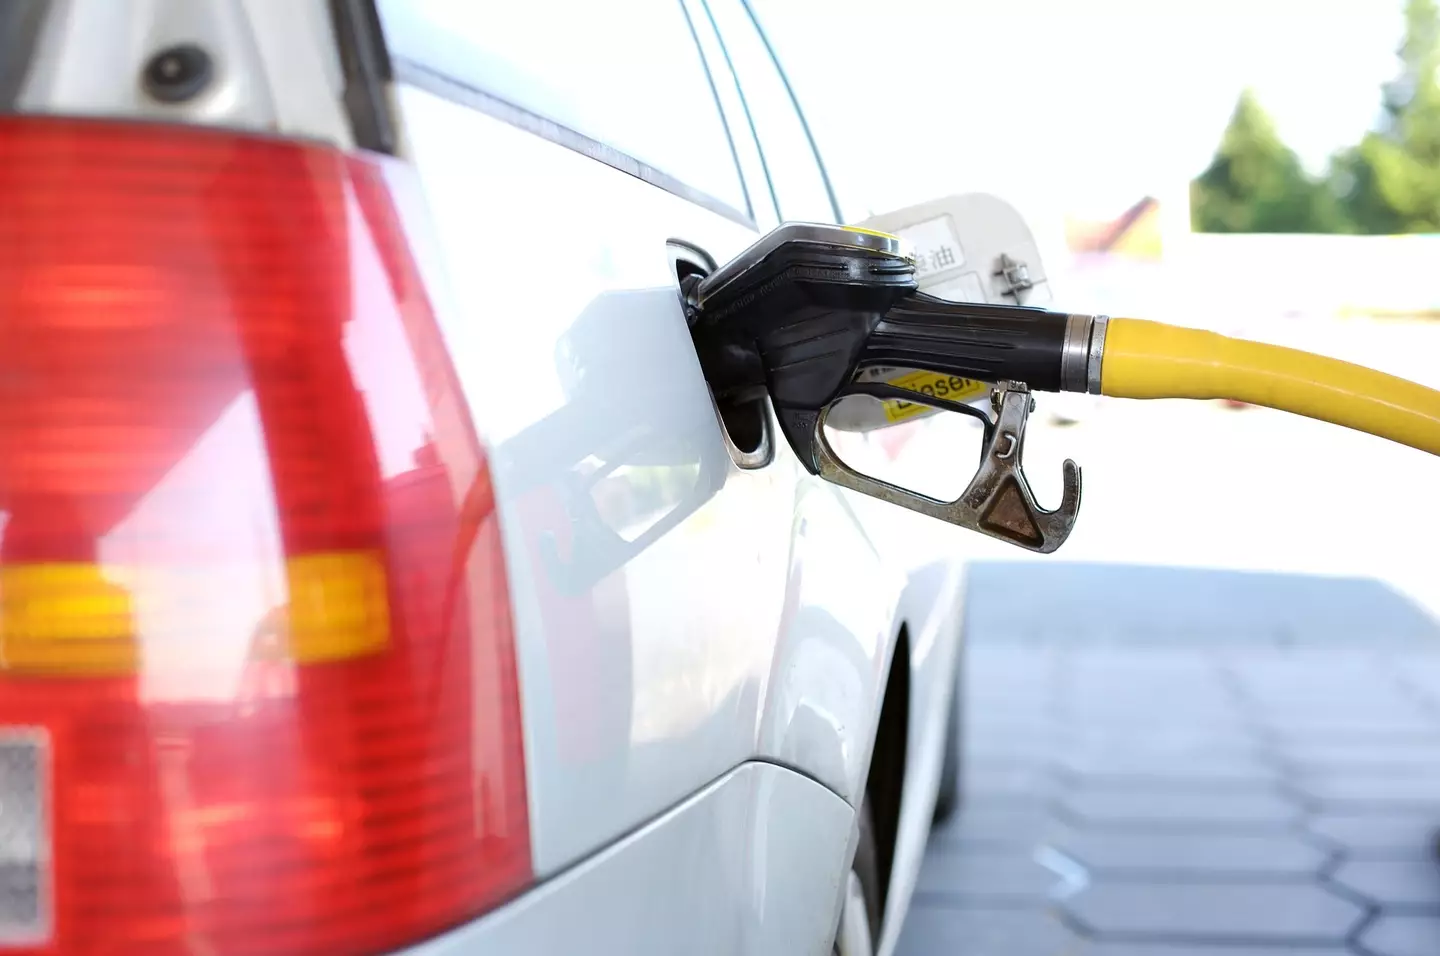 The cost of a tank of diesel is now £101.86, while petrol is £98.